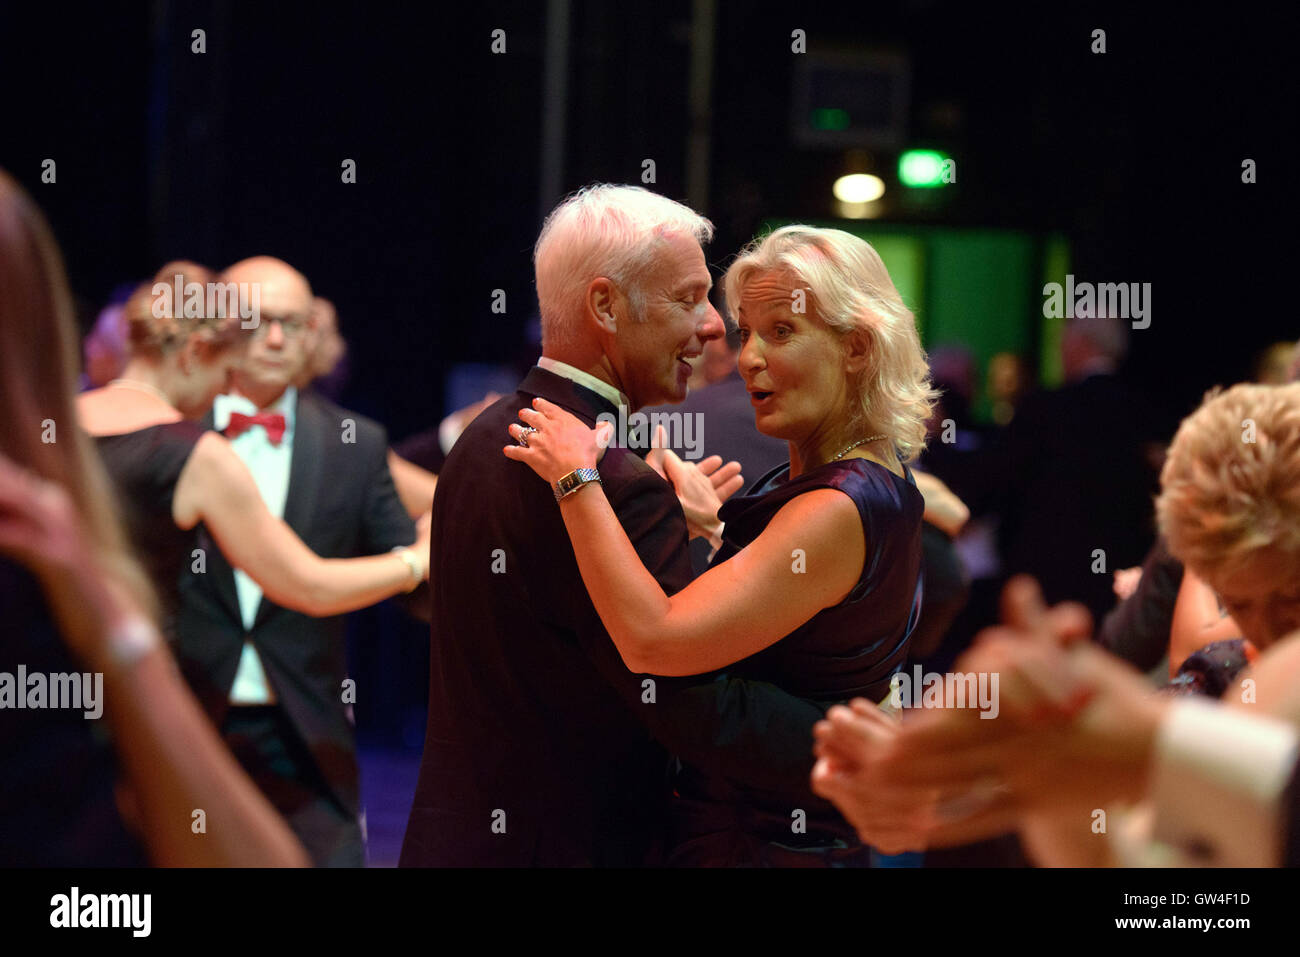 Leipzig, Germany. 10th Sep, 2016. Matthias Mueller, chairman of Volkswagen  AG, and his partner Barbara Rittner, captain of the German Tennis Fed Cup  team, dancing at the Opera Ball in Leipzig, Germany,